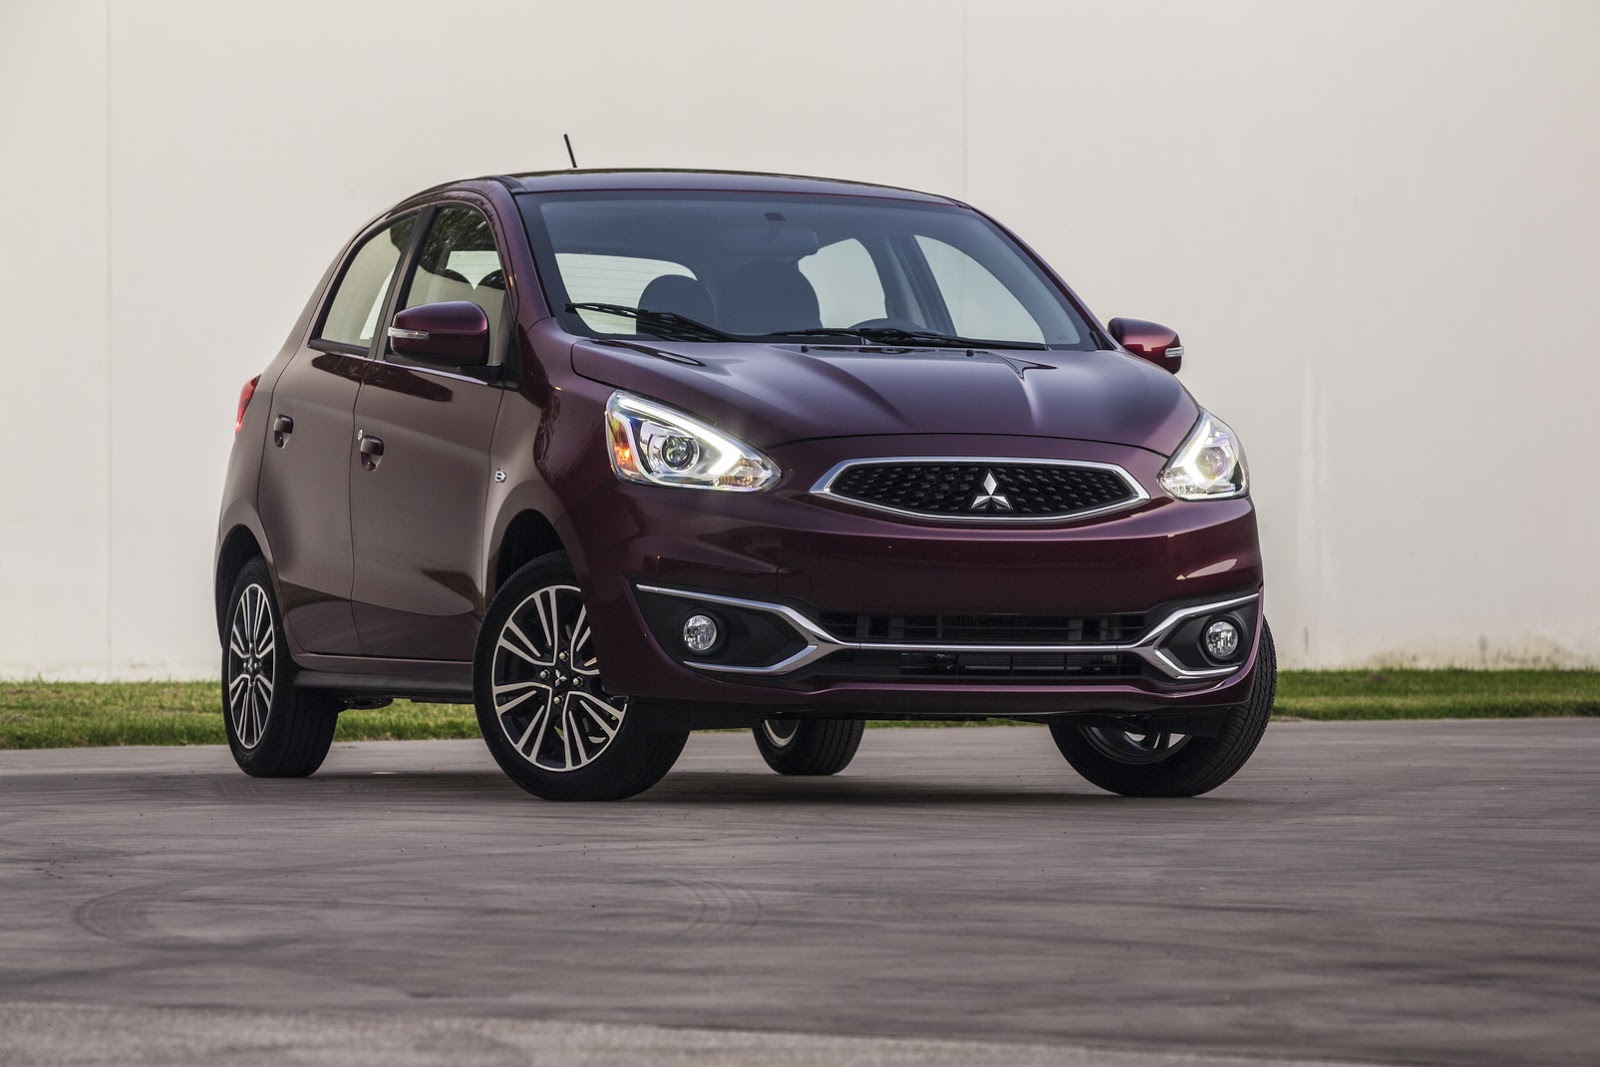 2017-mitsubishi-mirage-updated-with-new-look-carplay-and-android-auto-video-photo-gallery_1.jpg